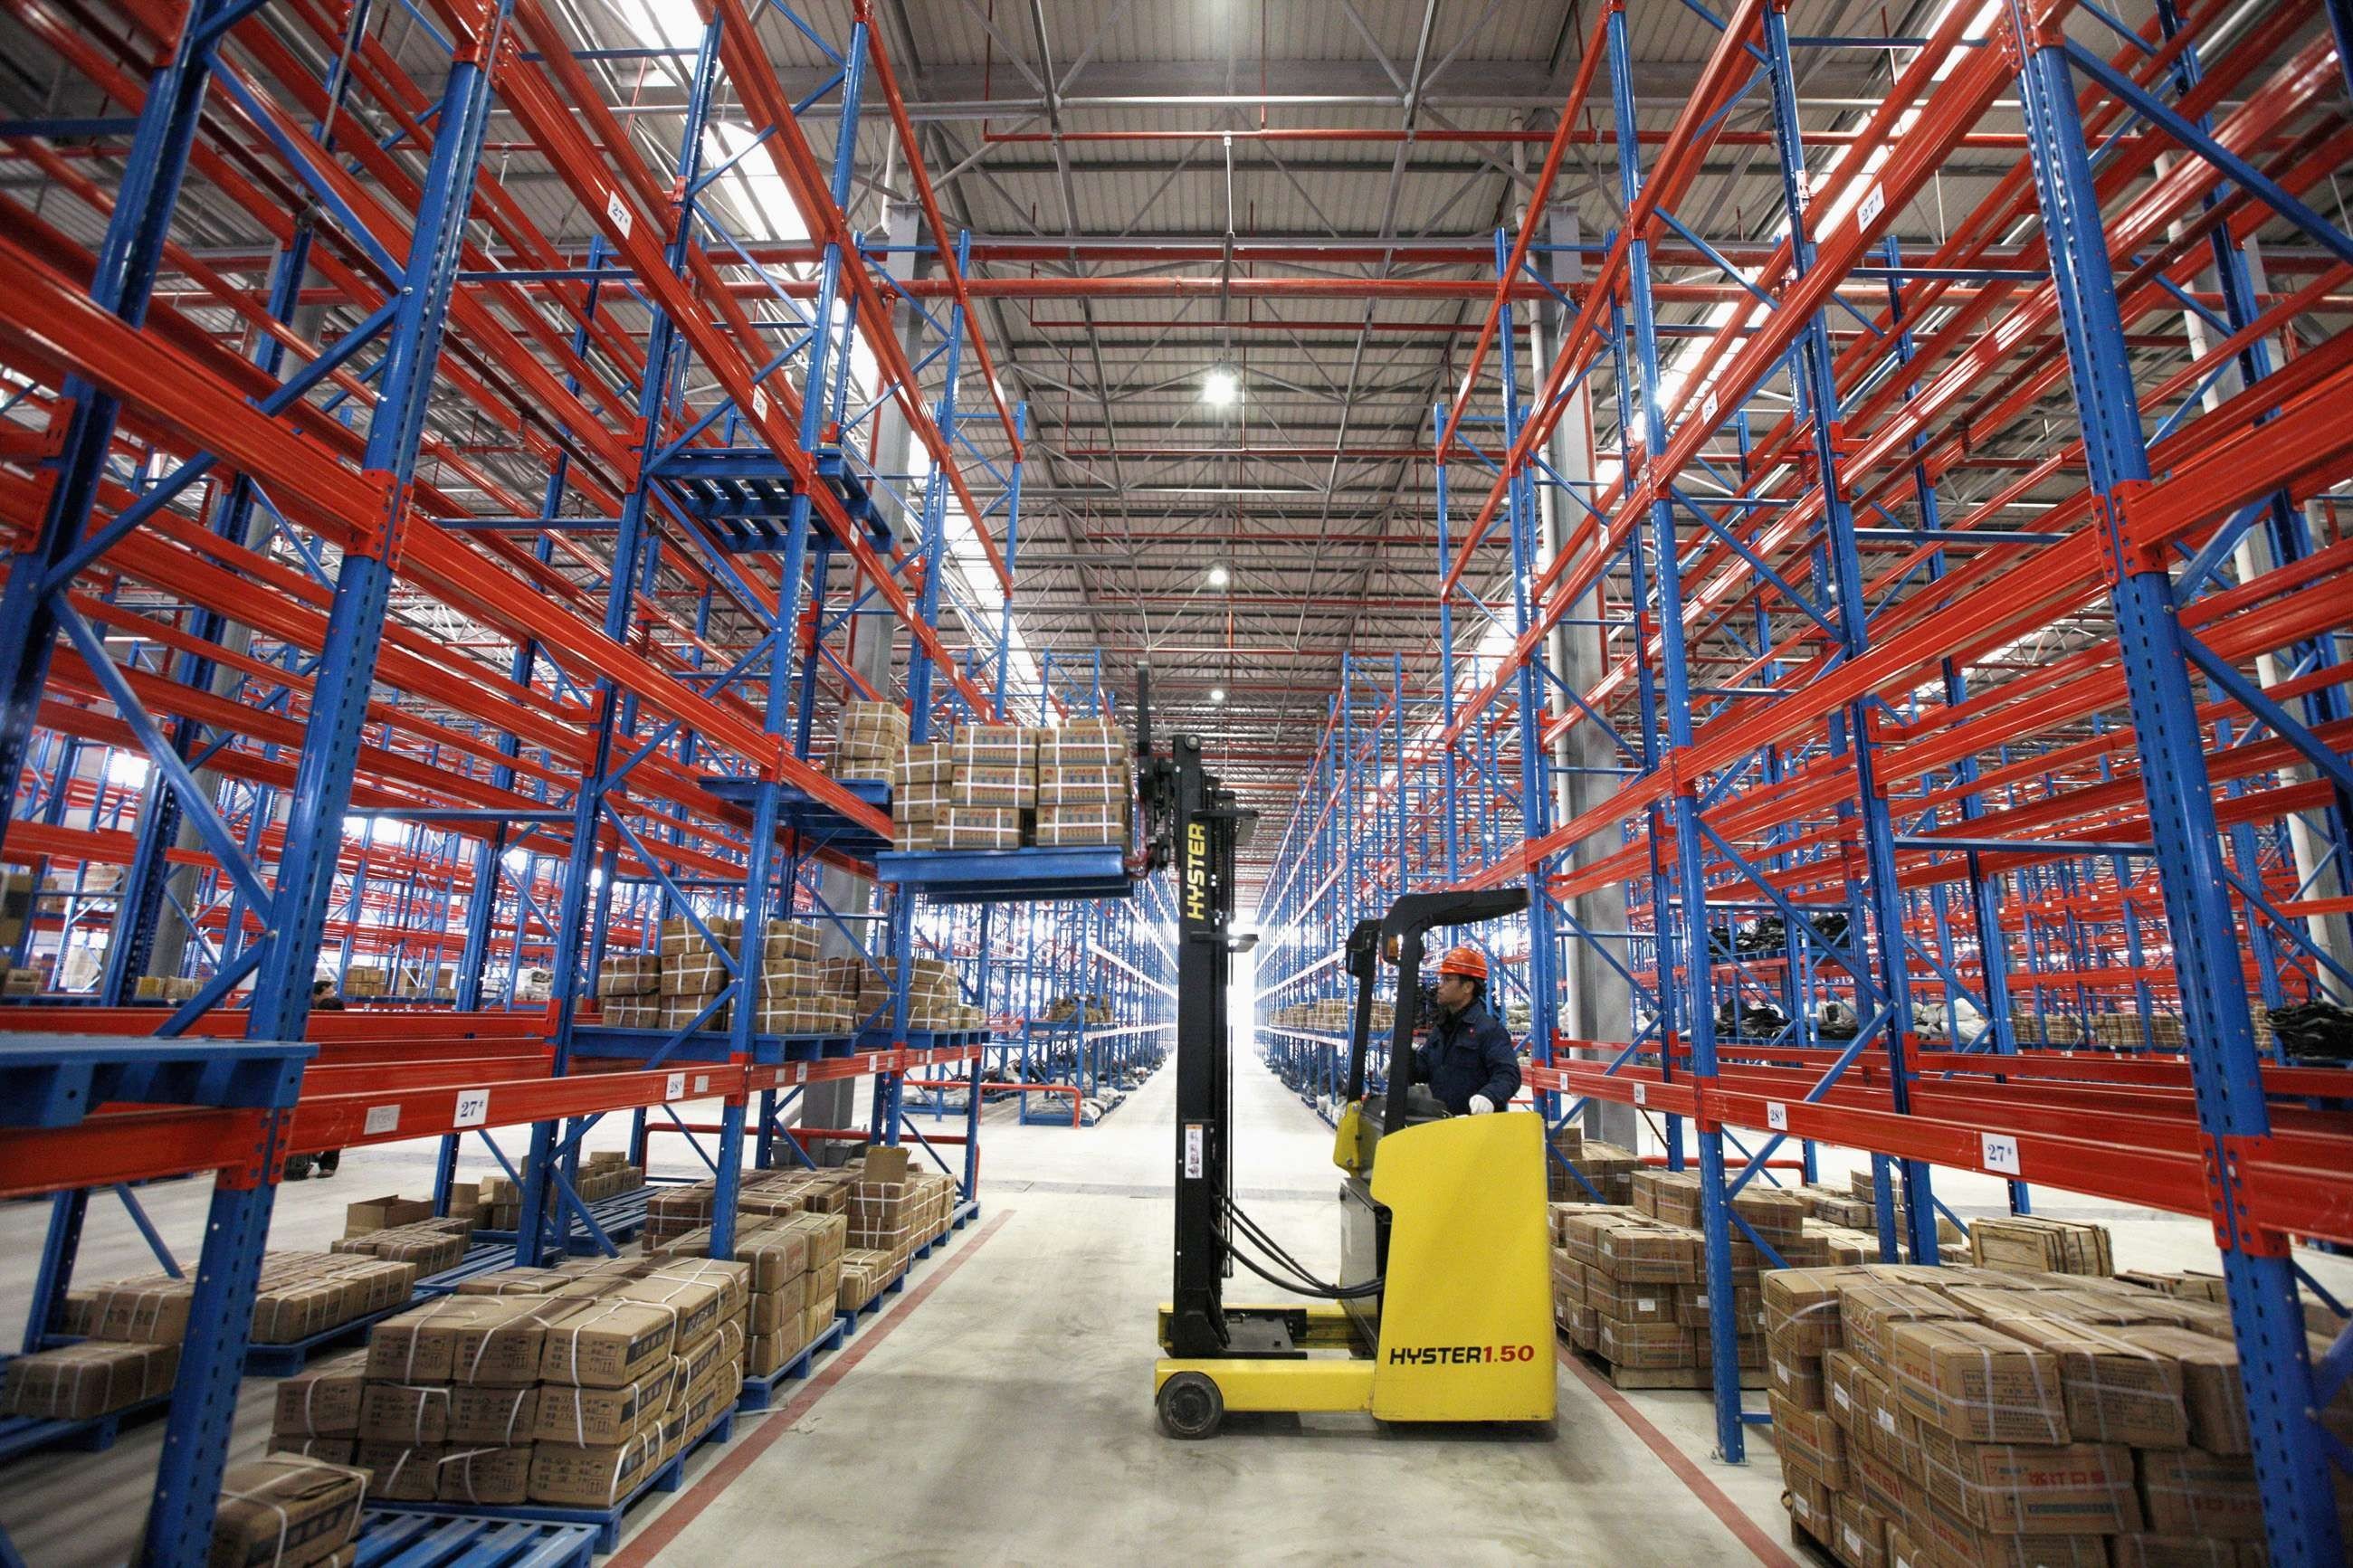 Global Logistics Properties, the Singapore-listed logistic giant, owns 17.5 million square metres of warehousing space in China, more than double the combination of what its four biggest rivals own, according to its annual report in March. Photo: Reuters